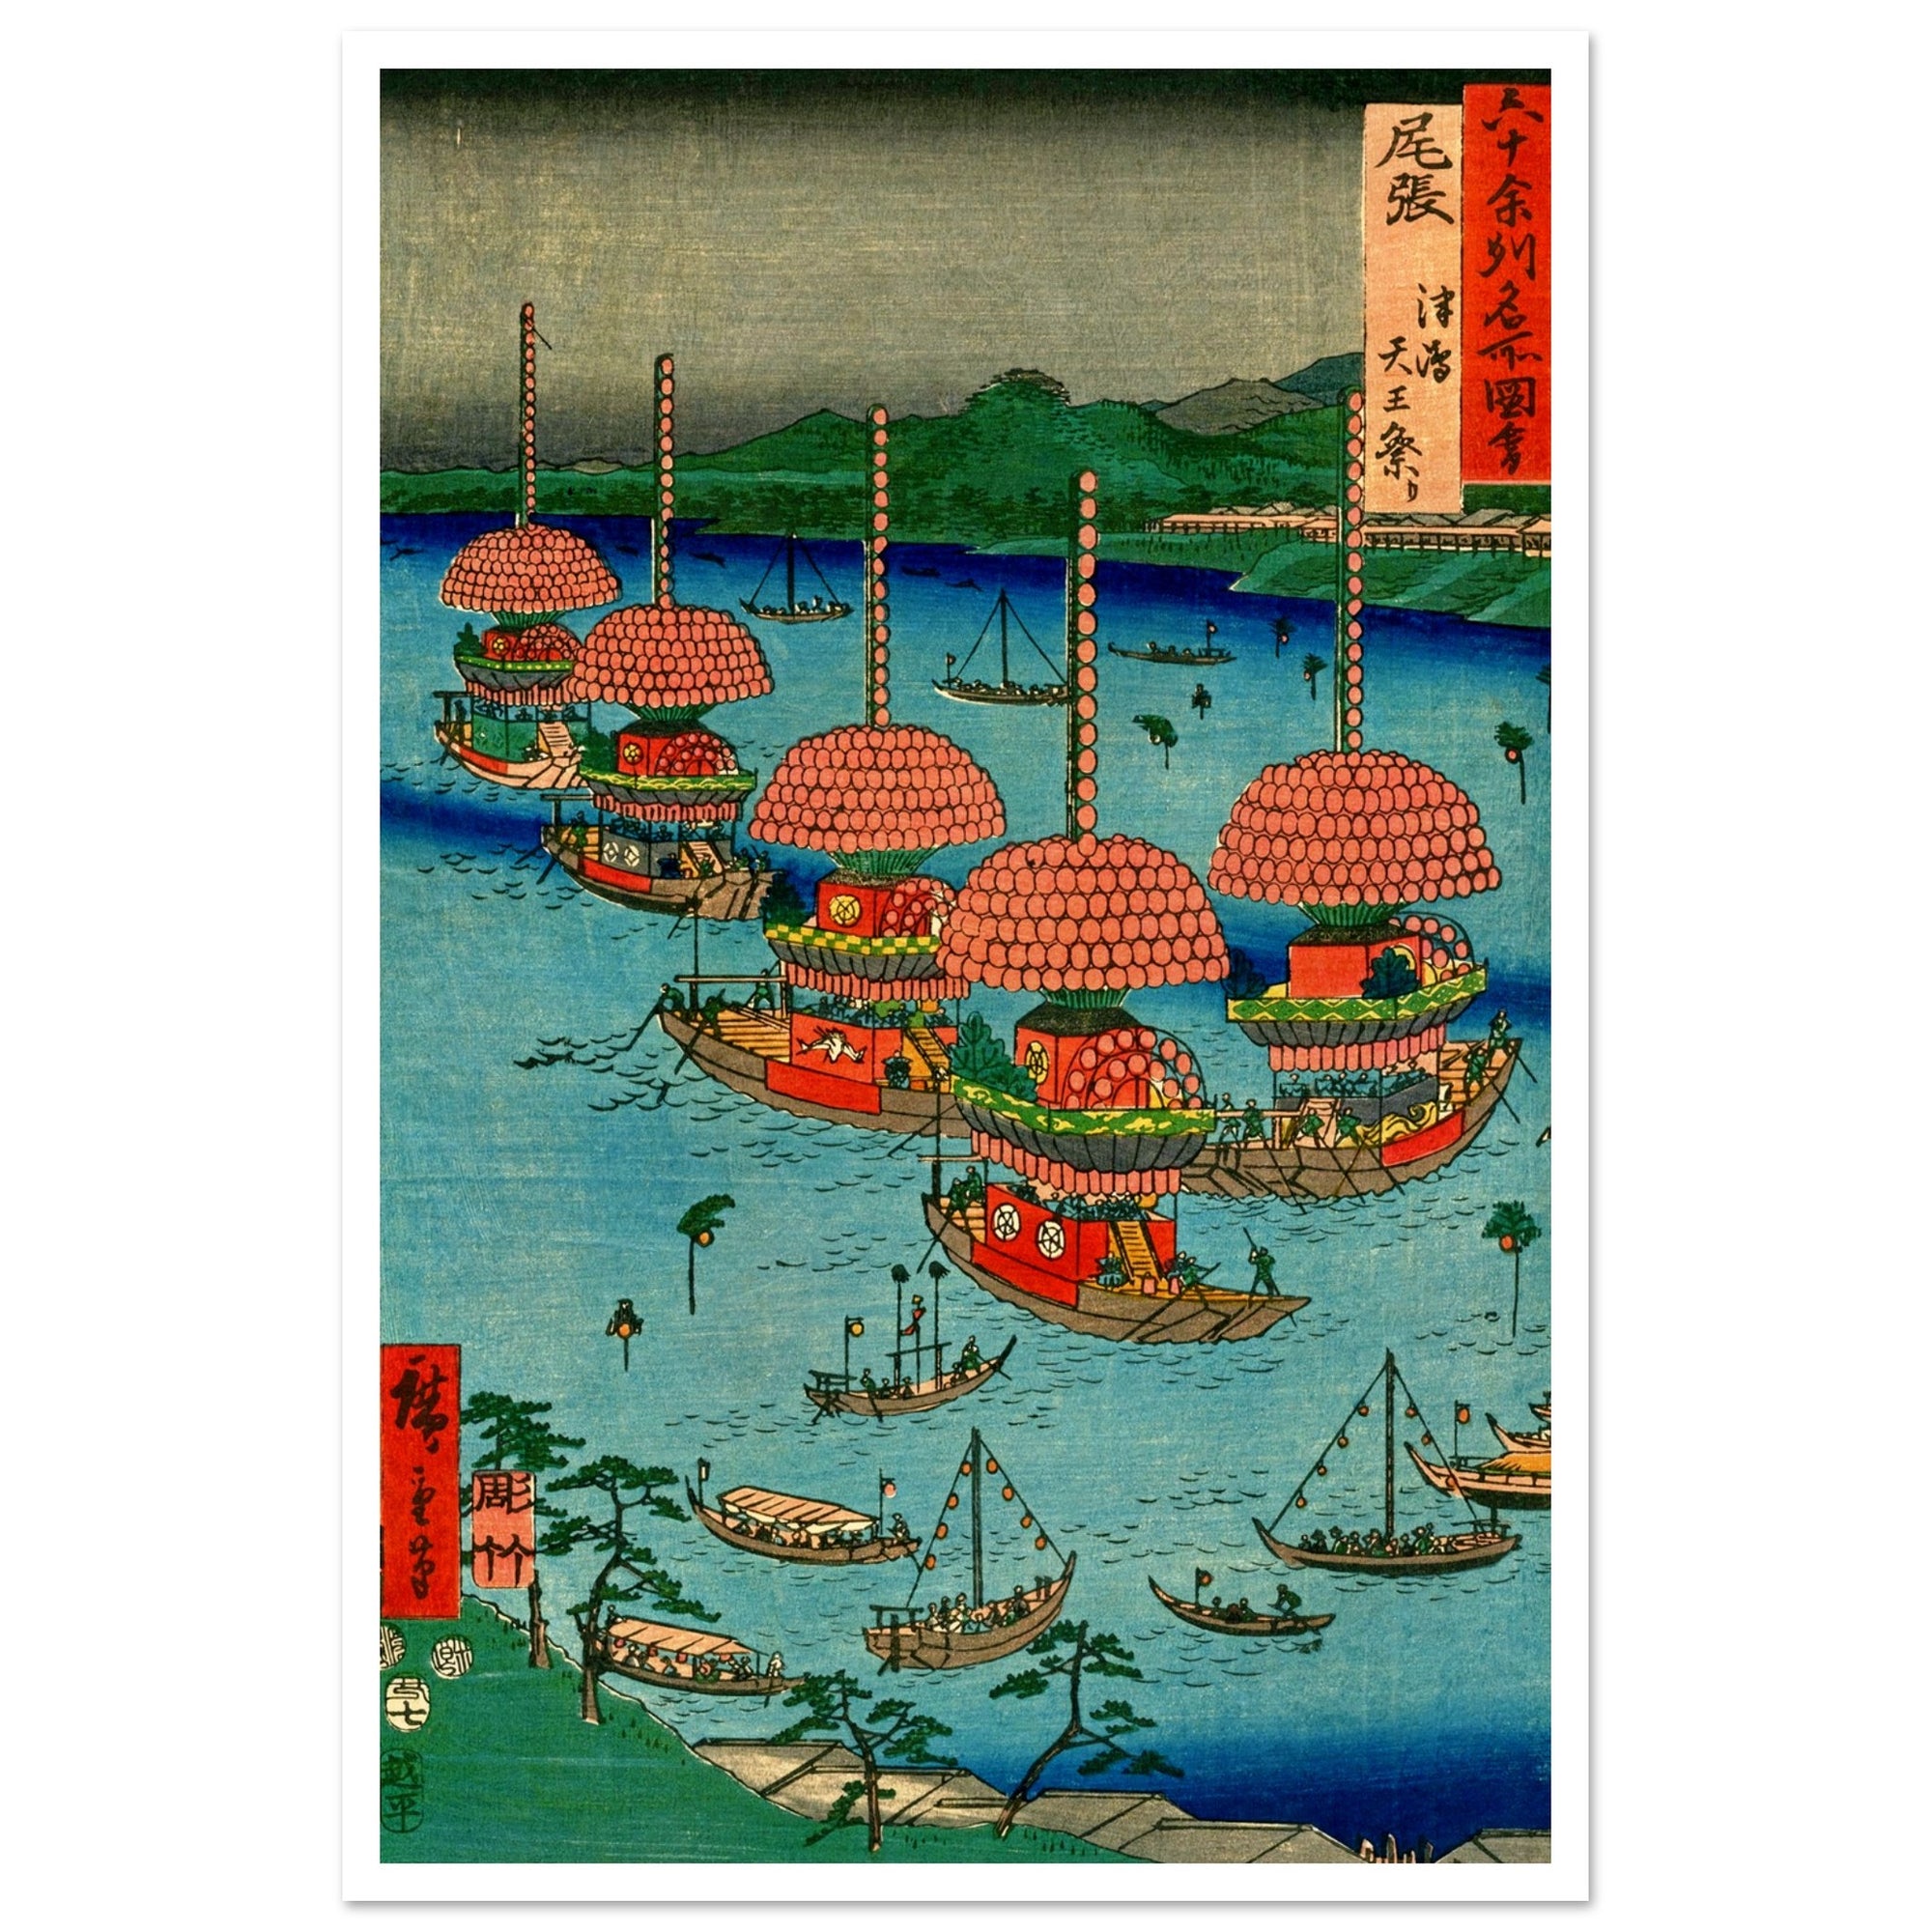 vintage japanese art poster with boats in water